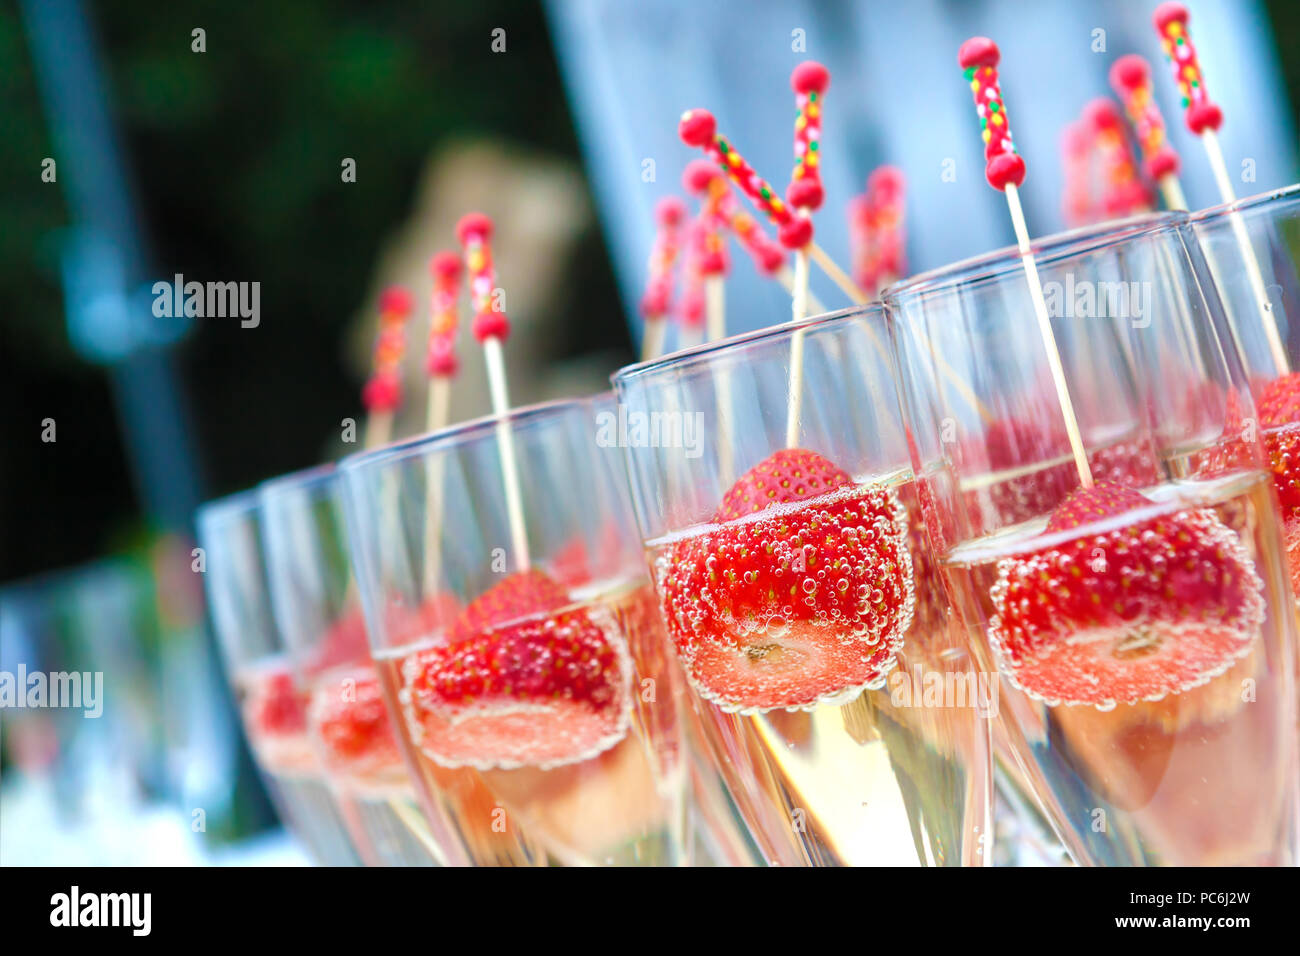 Food and catering.Wedding celebration and banquet.Strawberries and cava cup Stock Photo